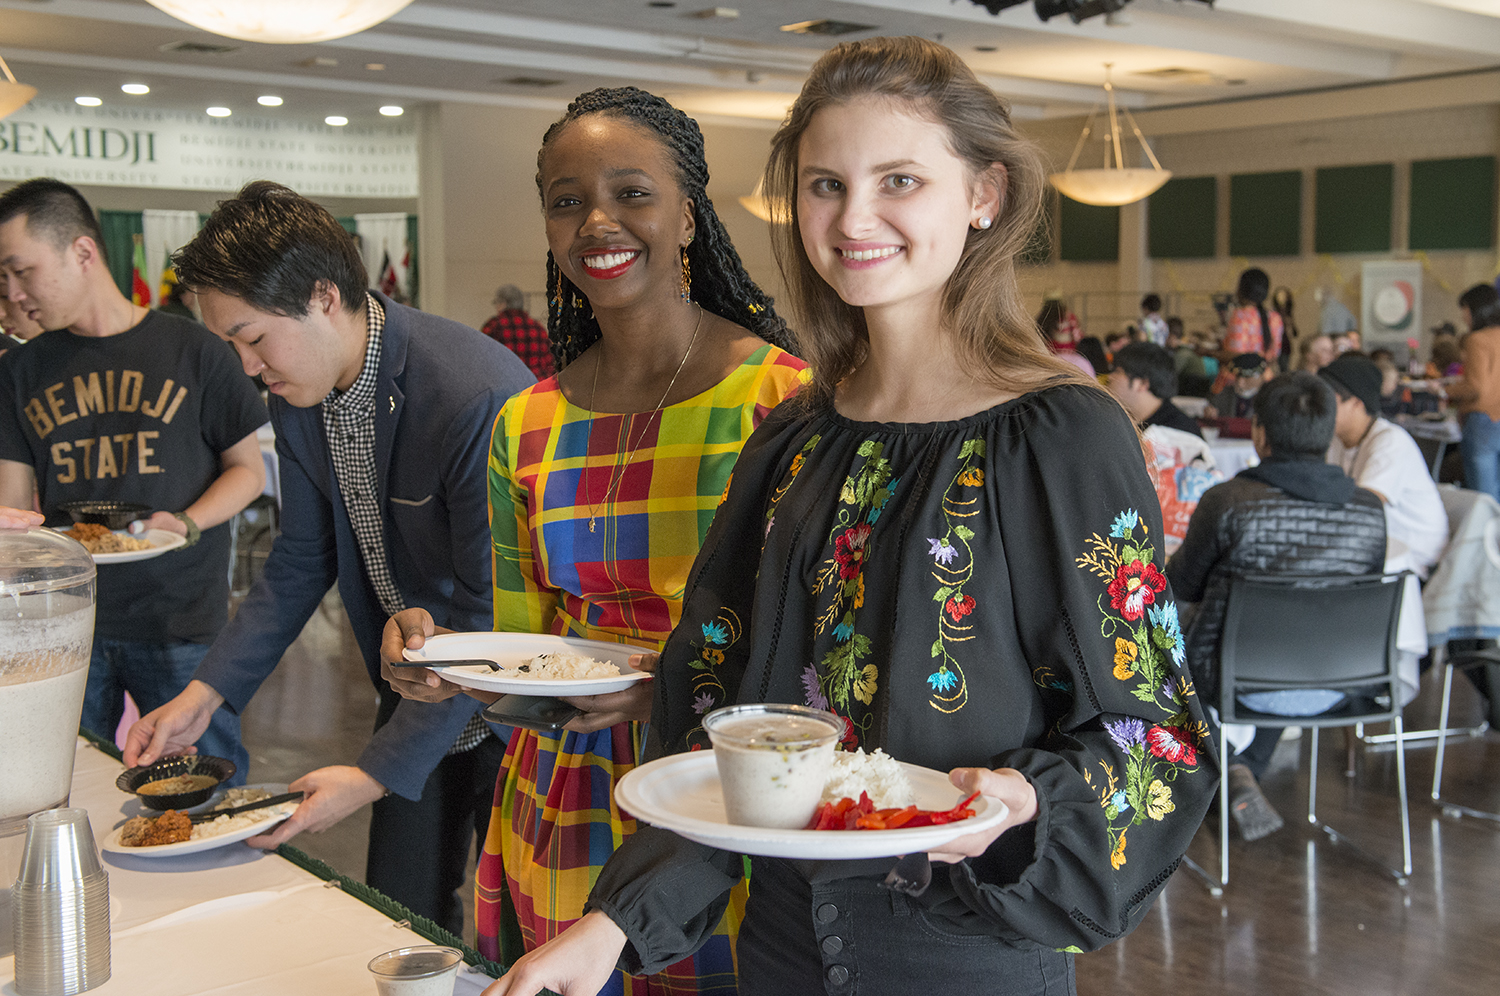 Attendees enjoyed a meal featuring food from across the globe.